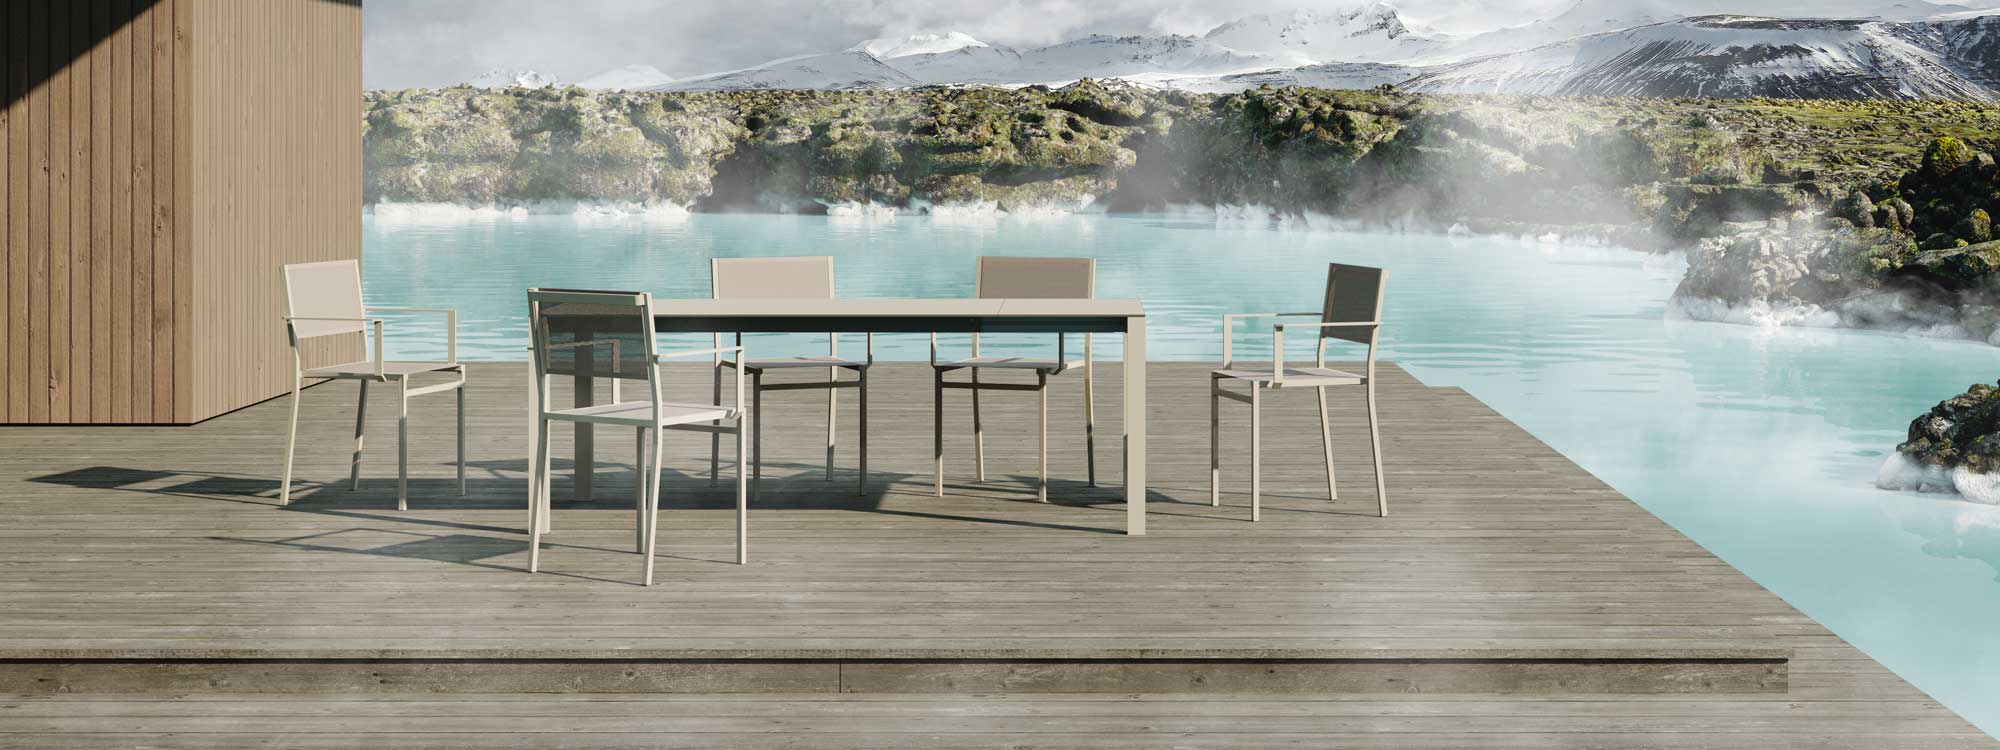 Image of 45 extending garden table and minimalist garden chairs by Oiside, shown on wooden decking with chilly lake and snowy mountains in the background